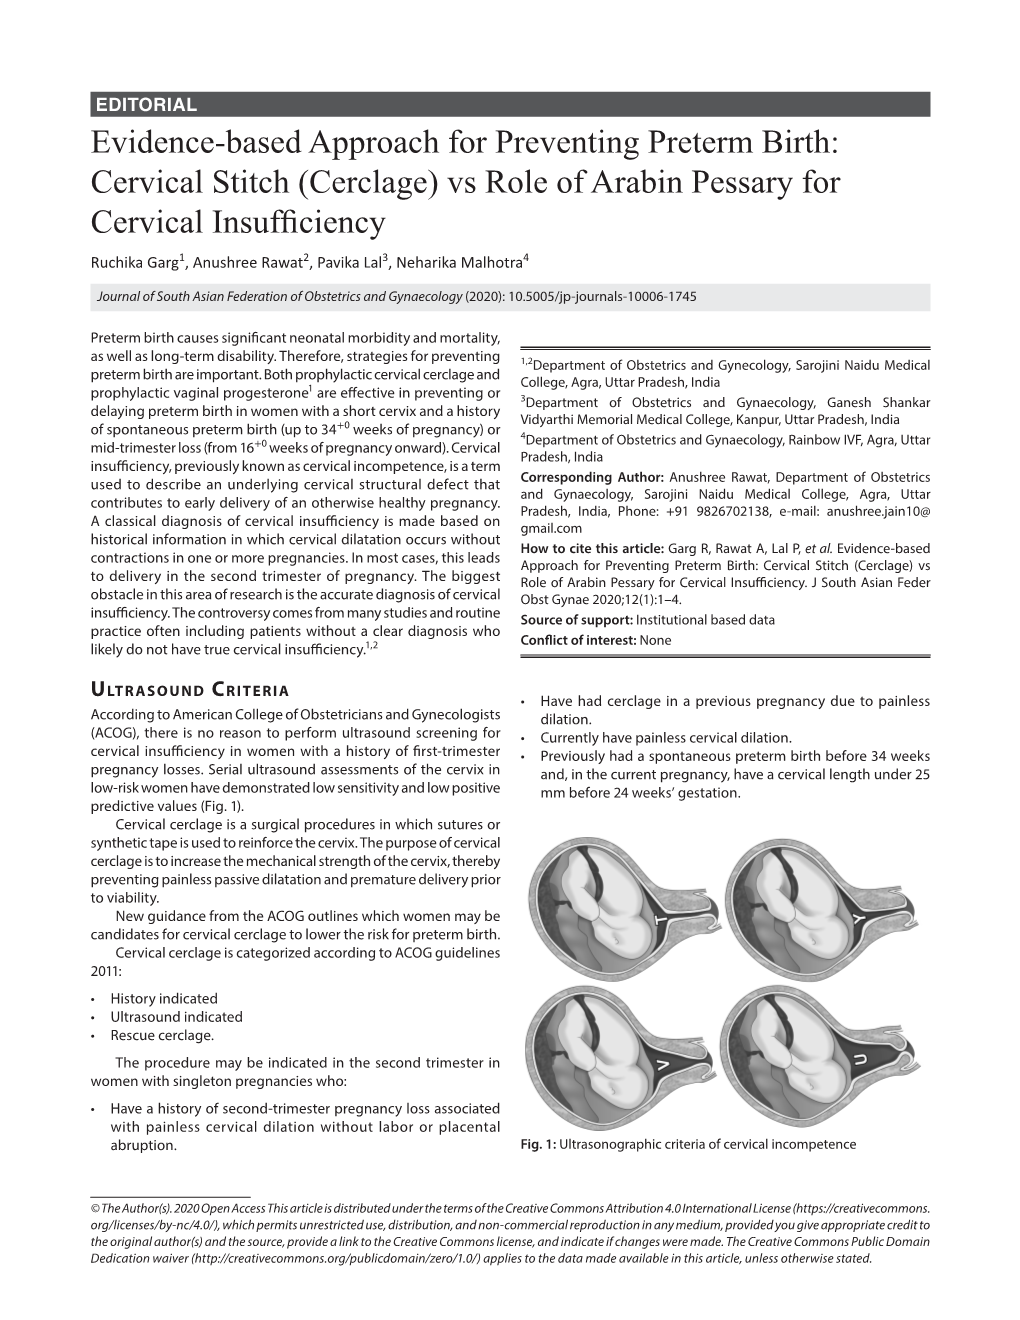 Evidence-Based Approach for Preventing Preterm Birth: Cervical Stitch (Cerclage)